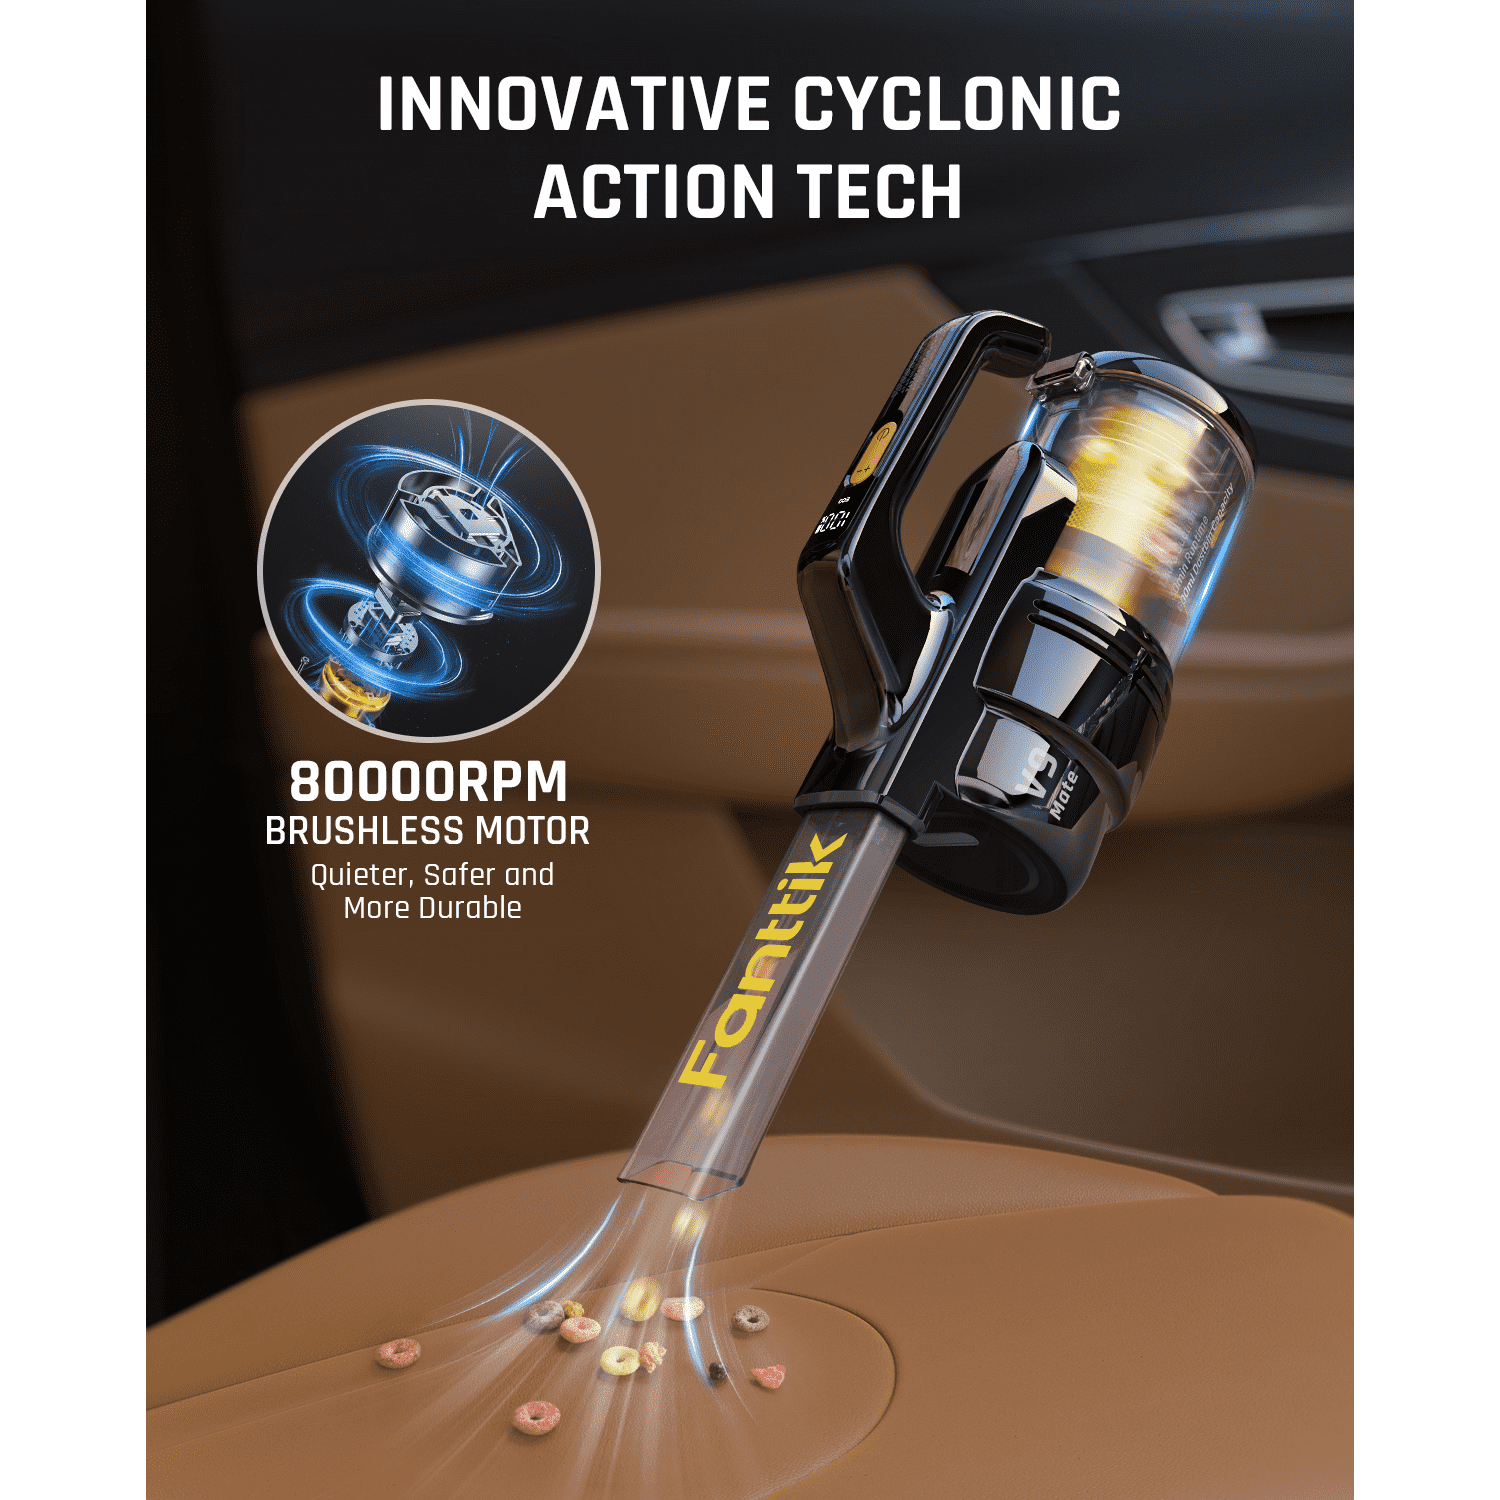 Fanttik V9 Mate Cordless Car Vacuum, Innovative air cyclone system with 80,000 RPM brushless motor creates a highly efficient system with high performance and low noise.